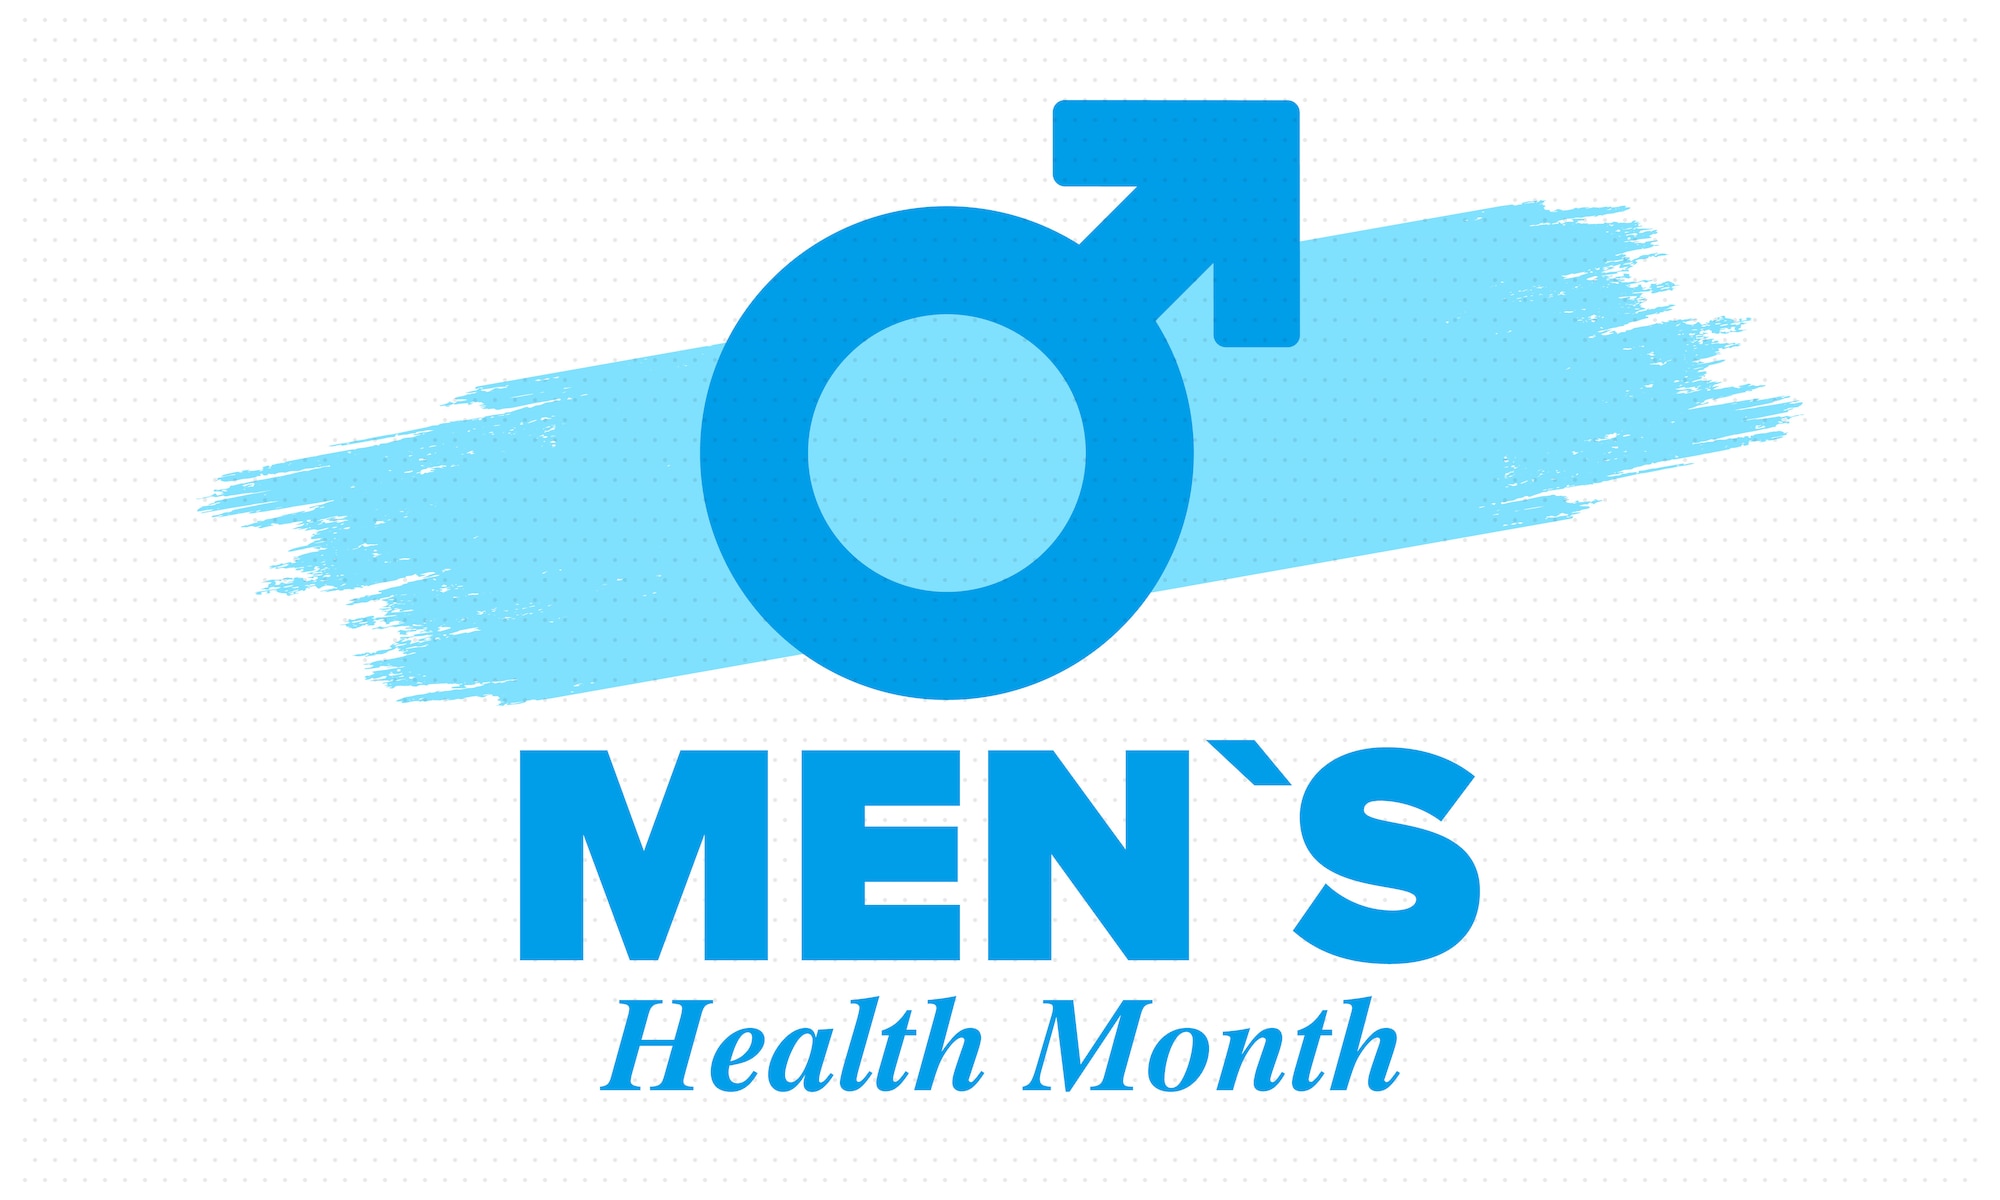 Graphic shows the symbol for male and says "Men's Health Month."